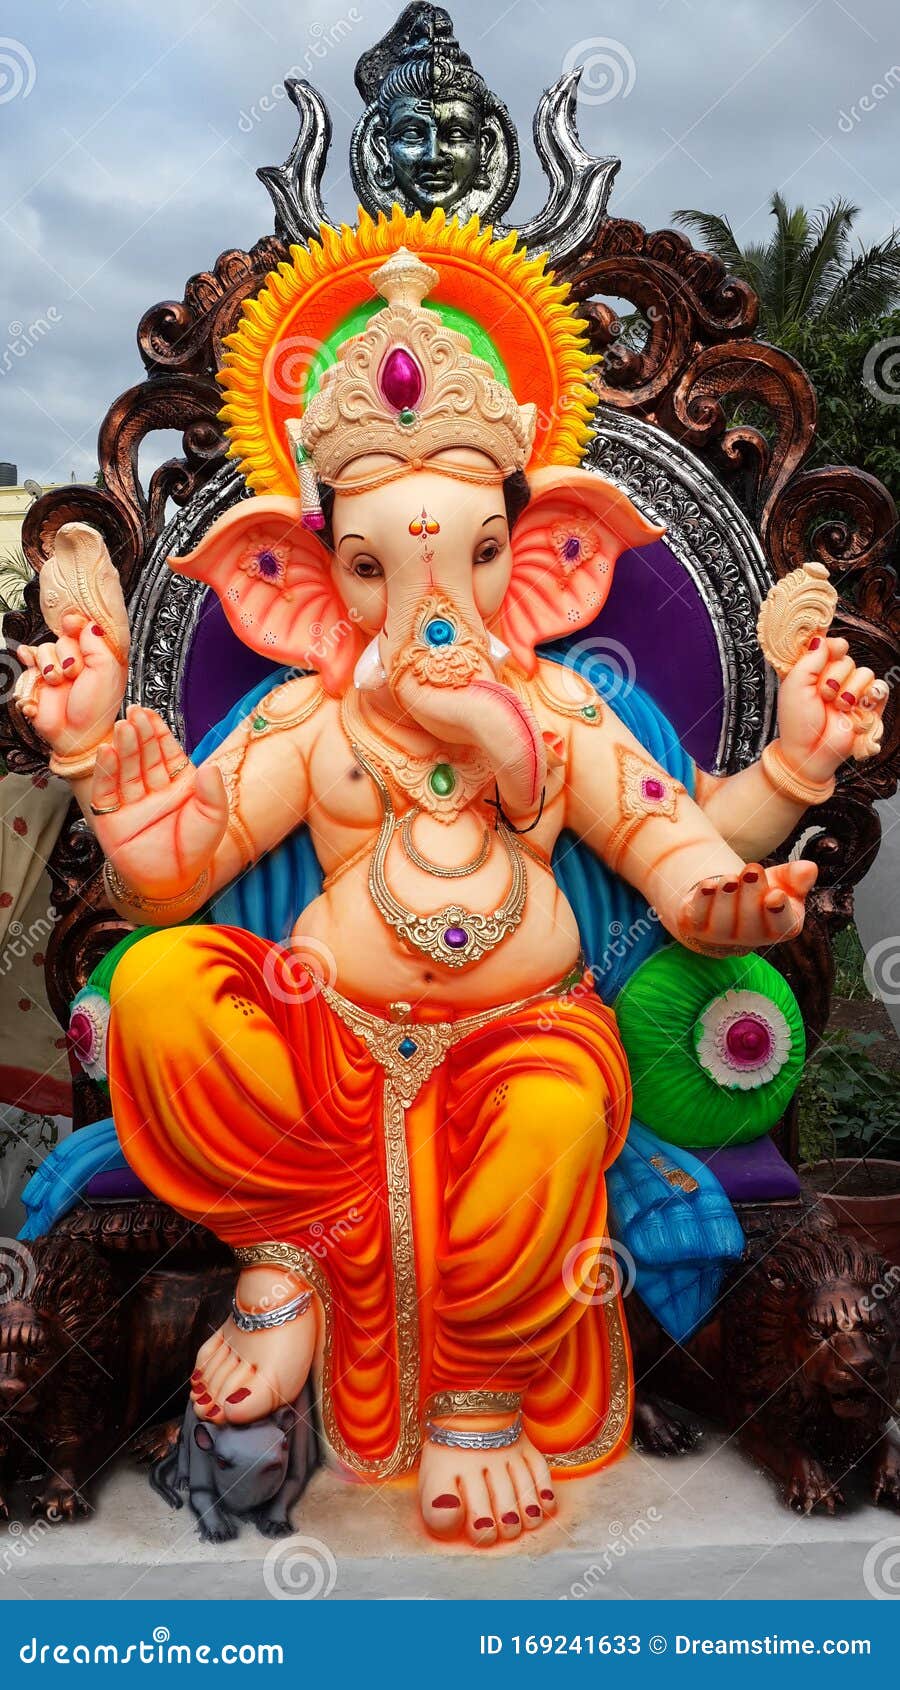 Cute Statue of Lord Ganesha Stock Image - Image of statue ...